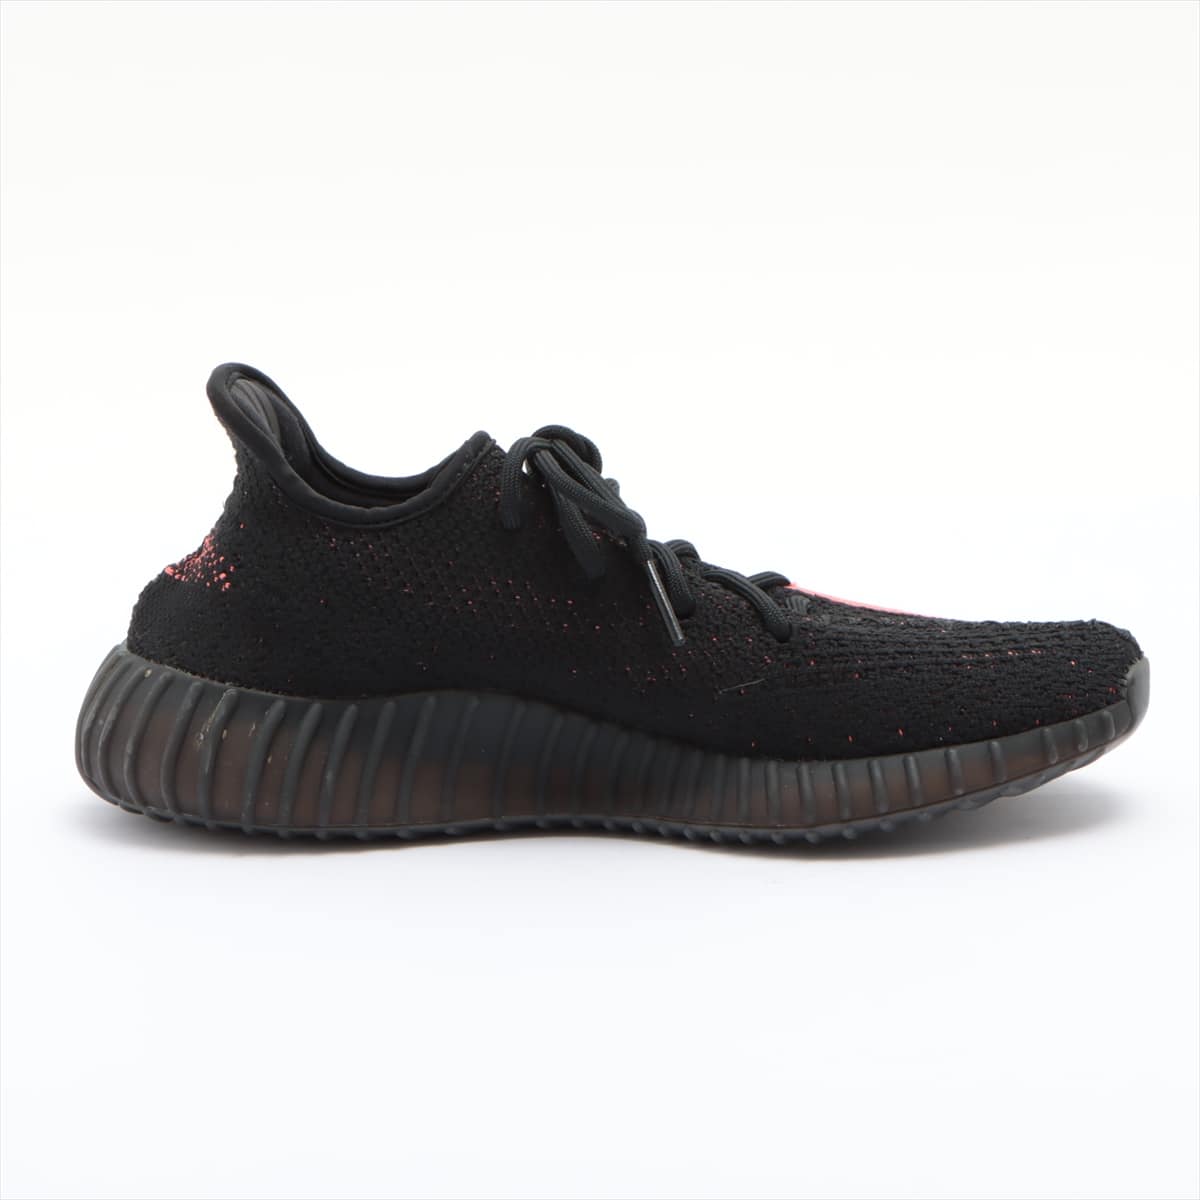 adidas x Kanye West YEEZY BOOST 350 V2 Knit Sneakers 26cm Men's Black BY9612